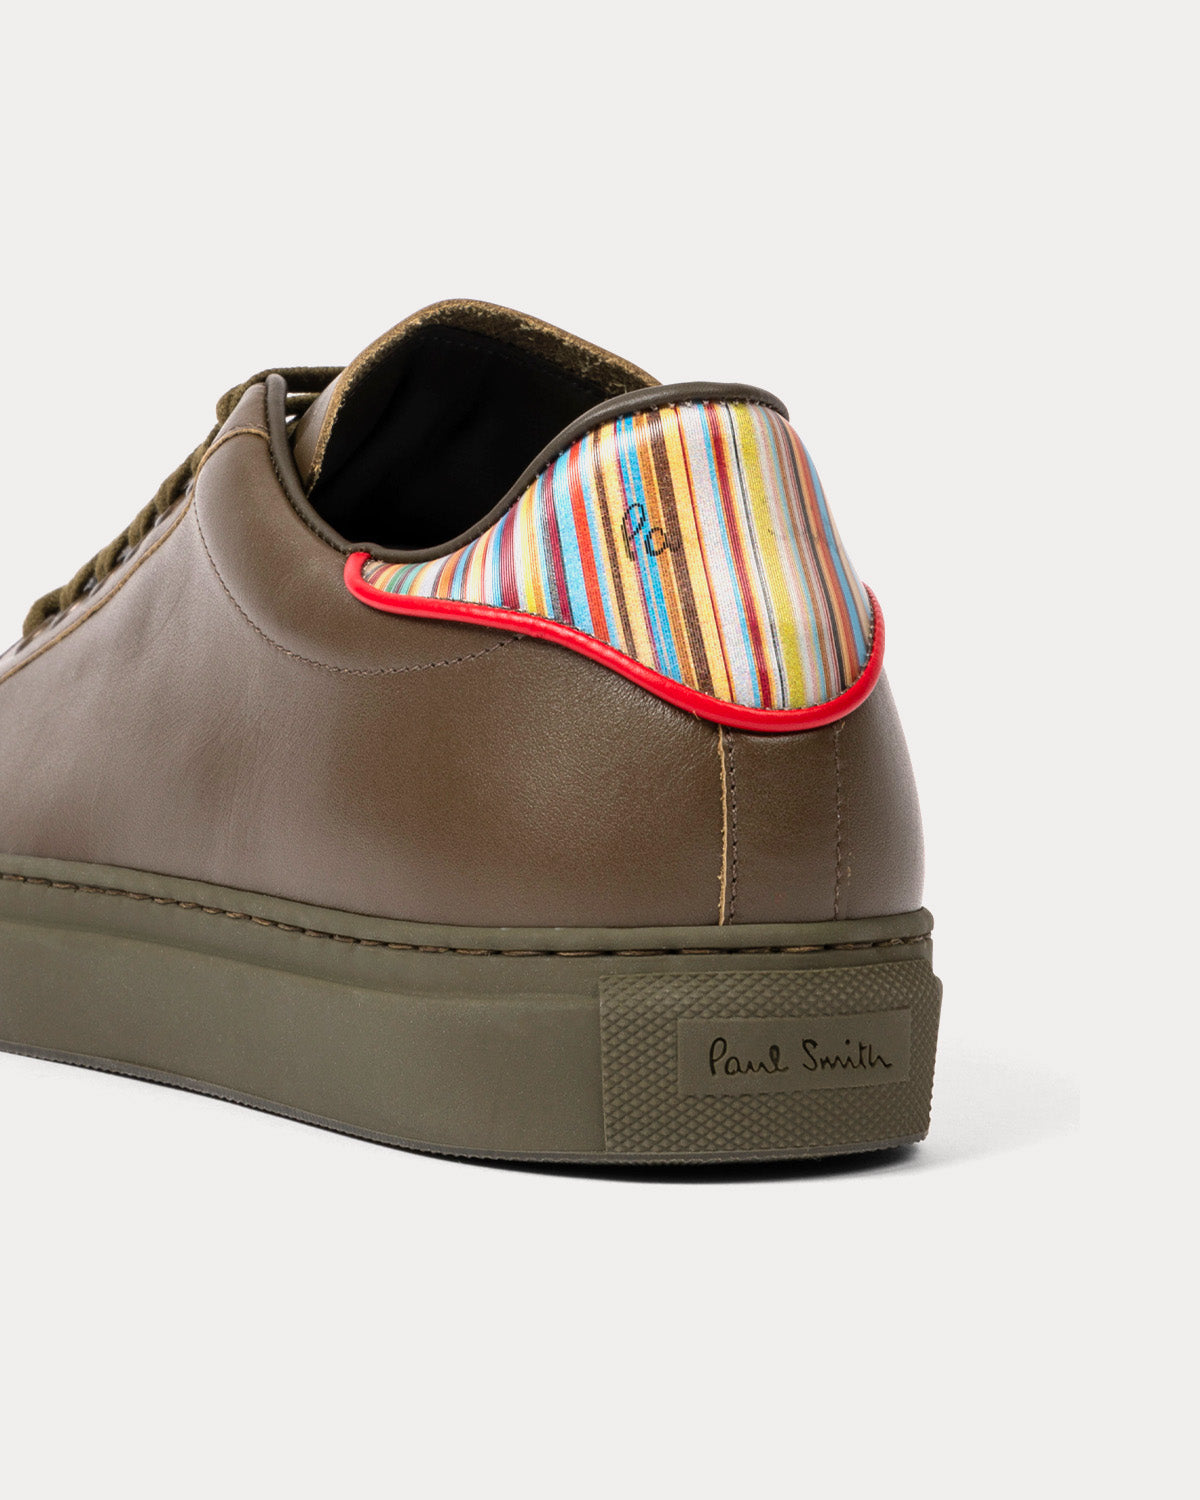 Paul Smith - Beck with Signature Stripe Leather Khaki Low Top Sneakers